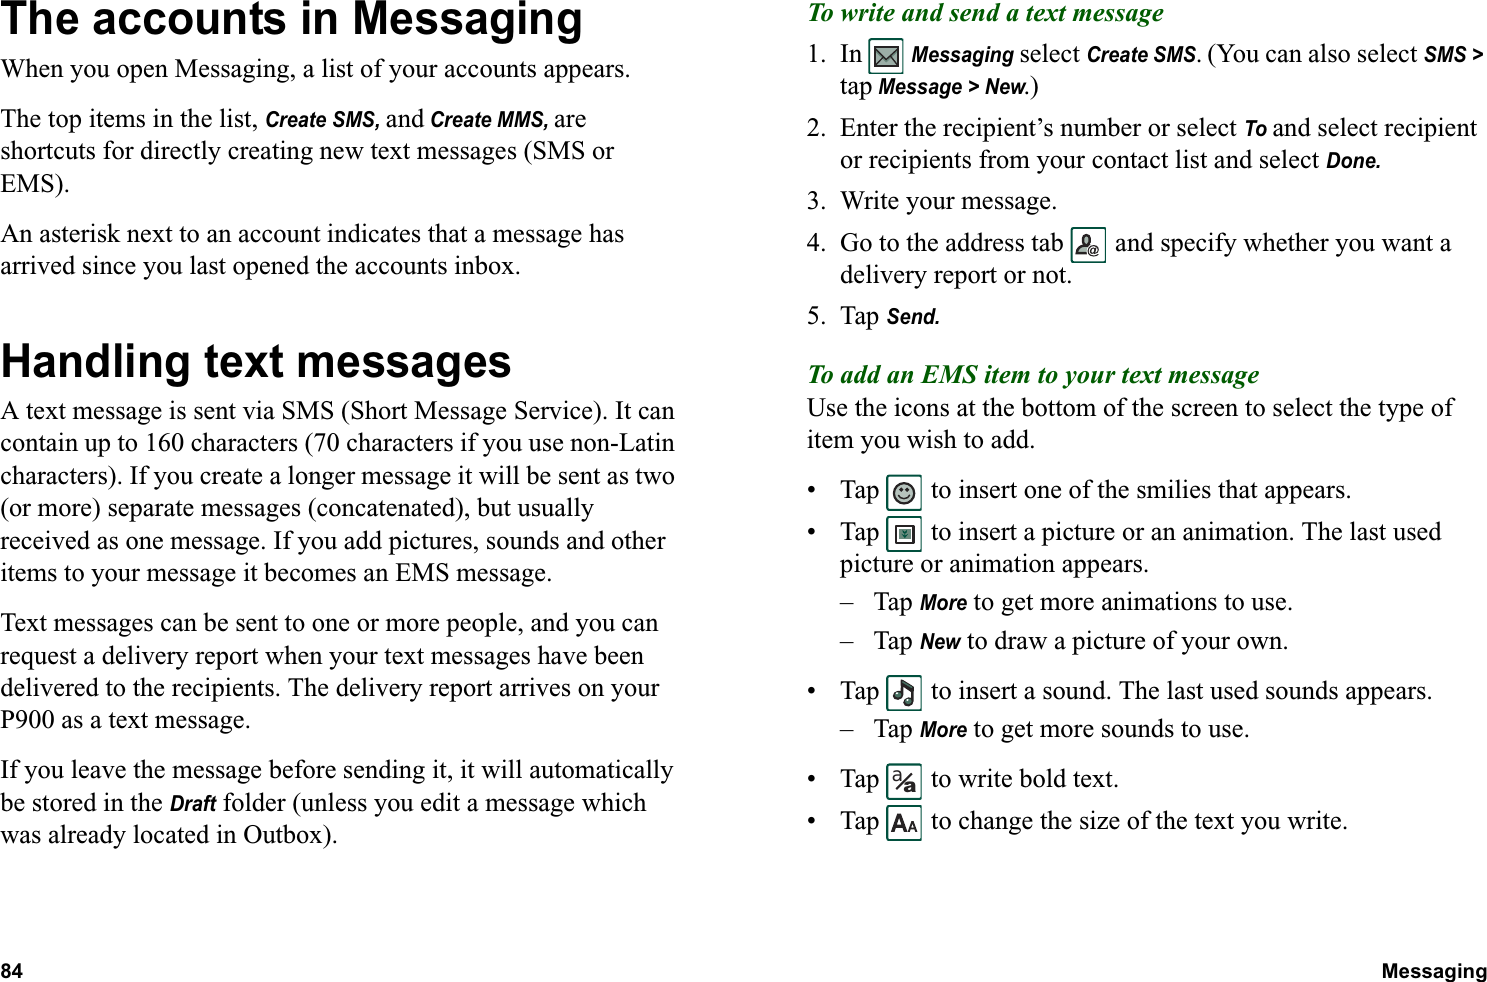 84 Messaging  The accounts in MessagingWhen you open Messaging, a list of your accounts appears.The top items in the list, Create SMS, and Create MMS, are shortcuts for directly creating new text messages (SMS or EMS).An asterisk next to an account indicates that a message has arrived since you last opened the accounts inbox.Handling text messagesA text message is sent via SMS (Short Message Service). It can contain up to 160 characters (70 characters if you use non-Latin characters). If you create a longer message it will be sent as two (or more) separate messages (concatenated), but usually received as one message. If you add pictures, sounds and other items to your message it becomes an EMS message.Text messages can be sent to one or more people, and you can request a delivery report when your text messages have been delivered to the recipients. The delivery report arrives on your P900 as a text message.If you leave the message before sending it, it will automatically be stored in the Draft folder (unless you edit a message which was already located in Outbox).To write and send a text message1. In  Messaging select Create SMS. (You can also select SMS &gt; tap Message &gt; New.)2. Enter the recipient’s number or select To and select recipient or recipients from your contact list and select Done.3. Write your message.4. Go to the address tab   and specify whether you want a delivery report or not.5. Tap Send.To add an EMS item to your text messageUse the icons at the bottom of the screen to select the type of item you wish to add.• Tap   to insert one of the smilies that appears.• Tap   to insert a picture or an animation. The last used picture or animation appears.–Tap More to get more animations to use.–Tap New to draw a picture of your own.• Tap   to insert a sound. The last used sounds appears.–Tap More to get more sounds to use.• Tap   to write bold text.• Tap   to change the size of the text you write.aa